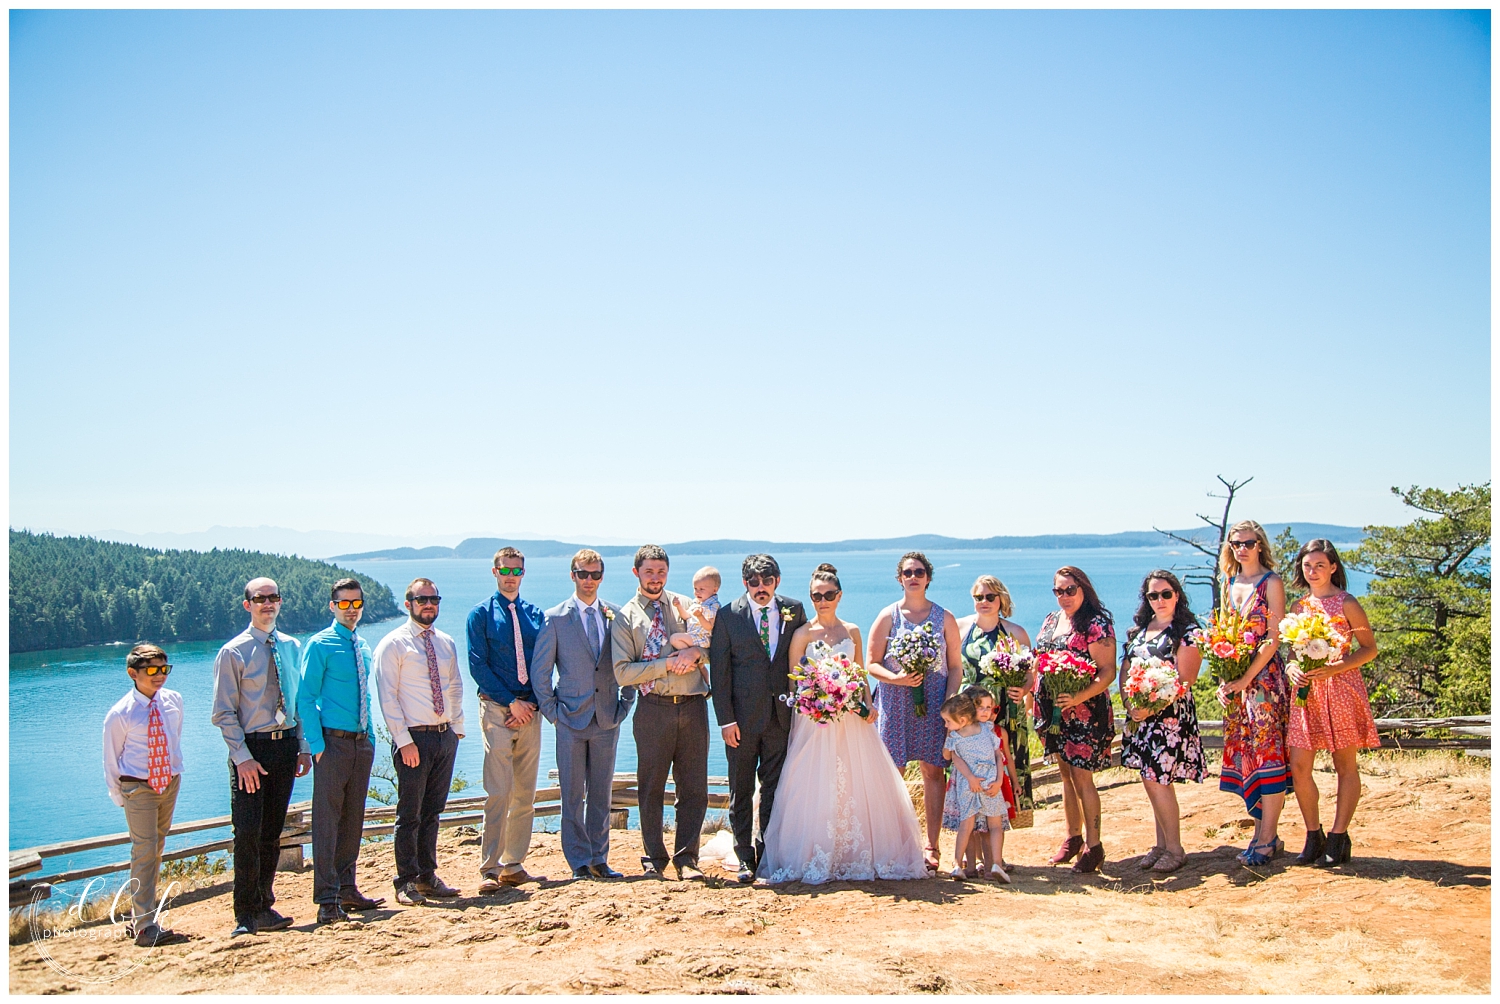 bridal party portraits for wildflower-themed wedding at Washington Park in Anacortes